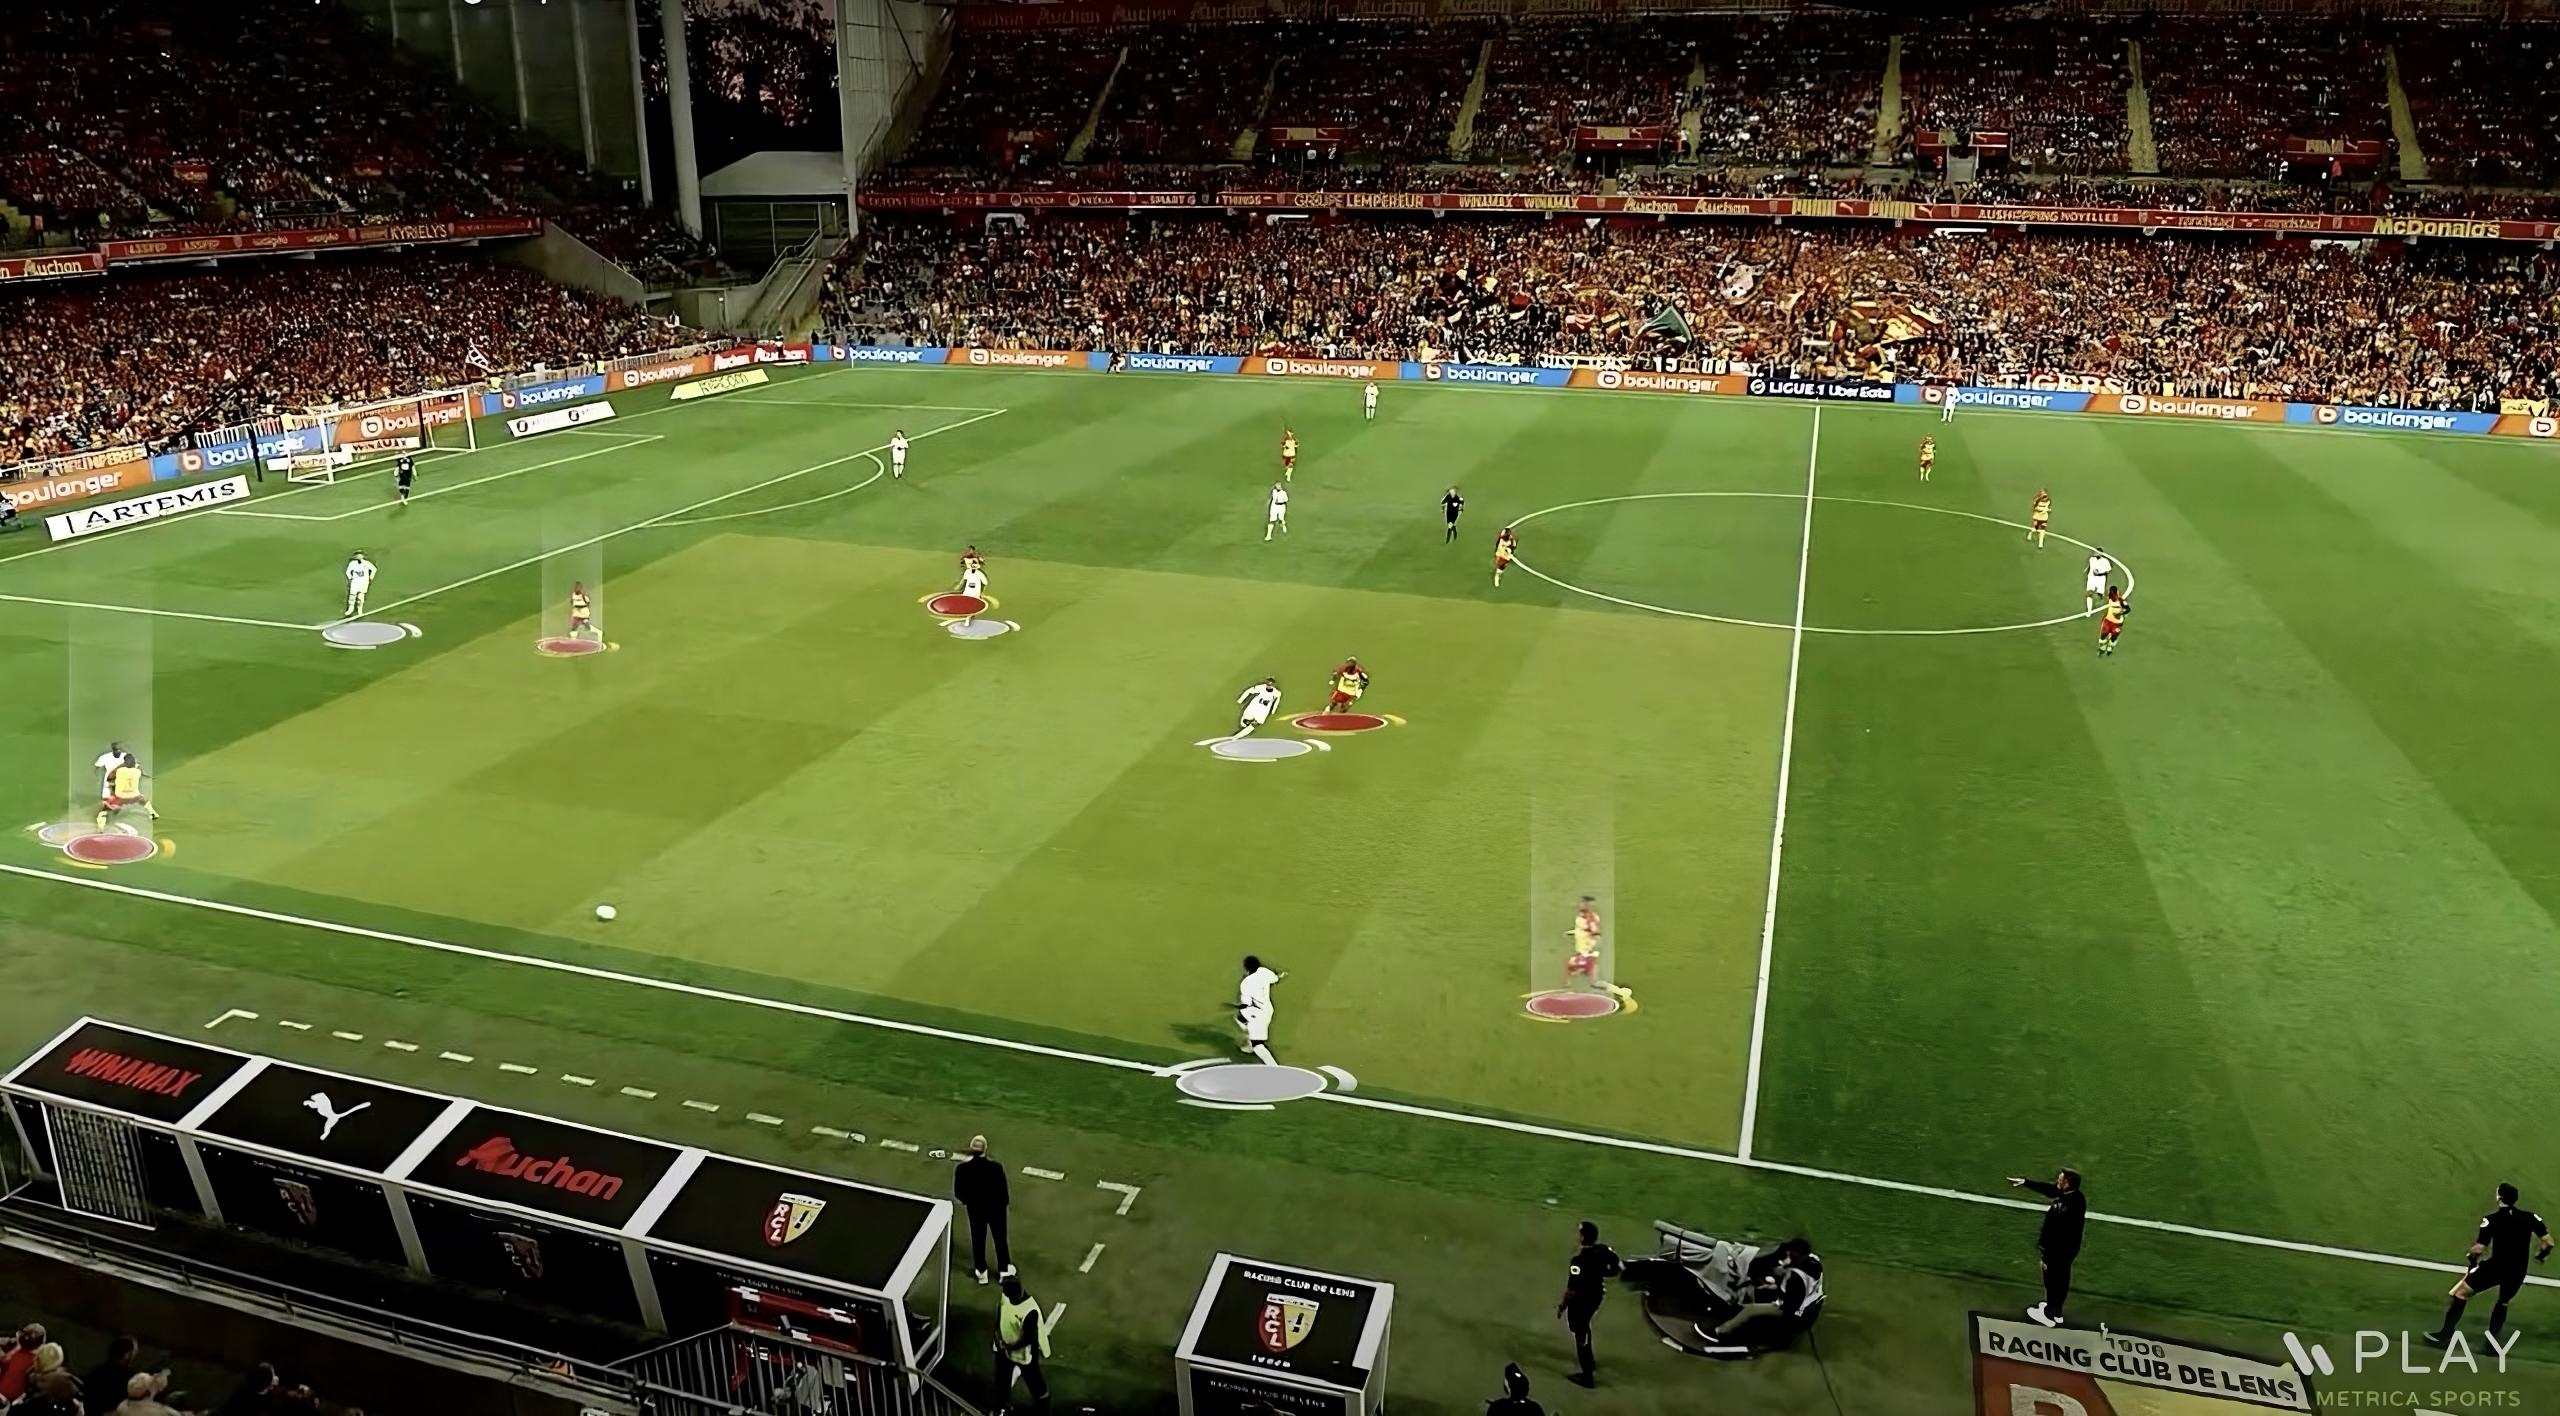 Lens' players demonstrate how to press in a 3-4-3 system